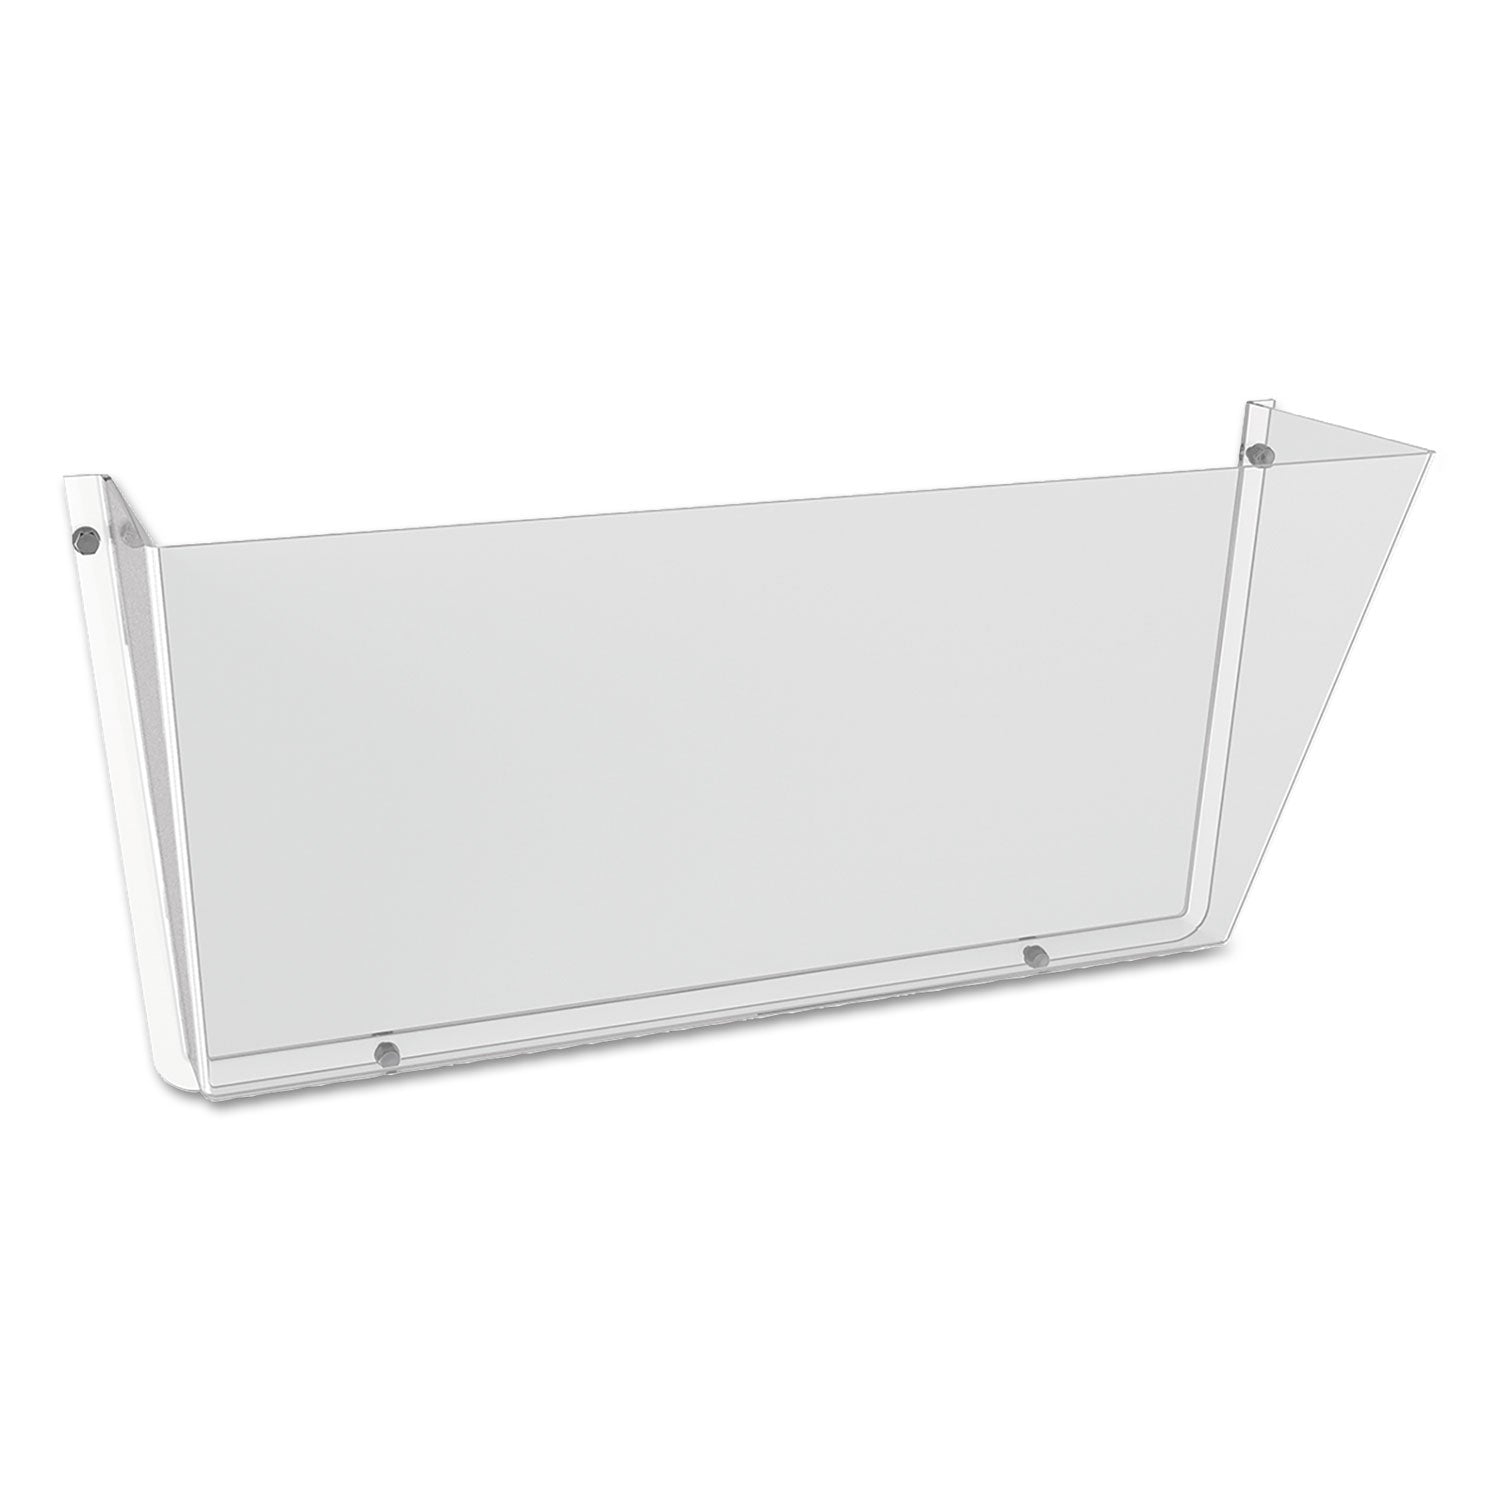 Unbreakable DocuPocket Wall File, Letter Size, 14.5" x 3" x 6.5", Clear - 